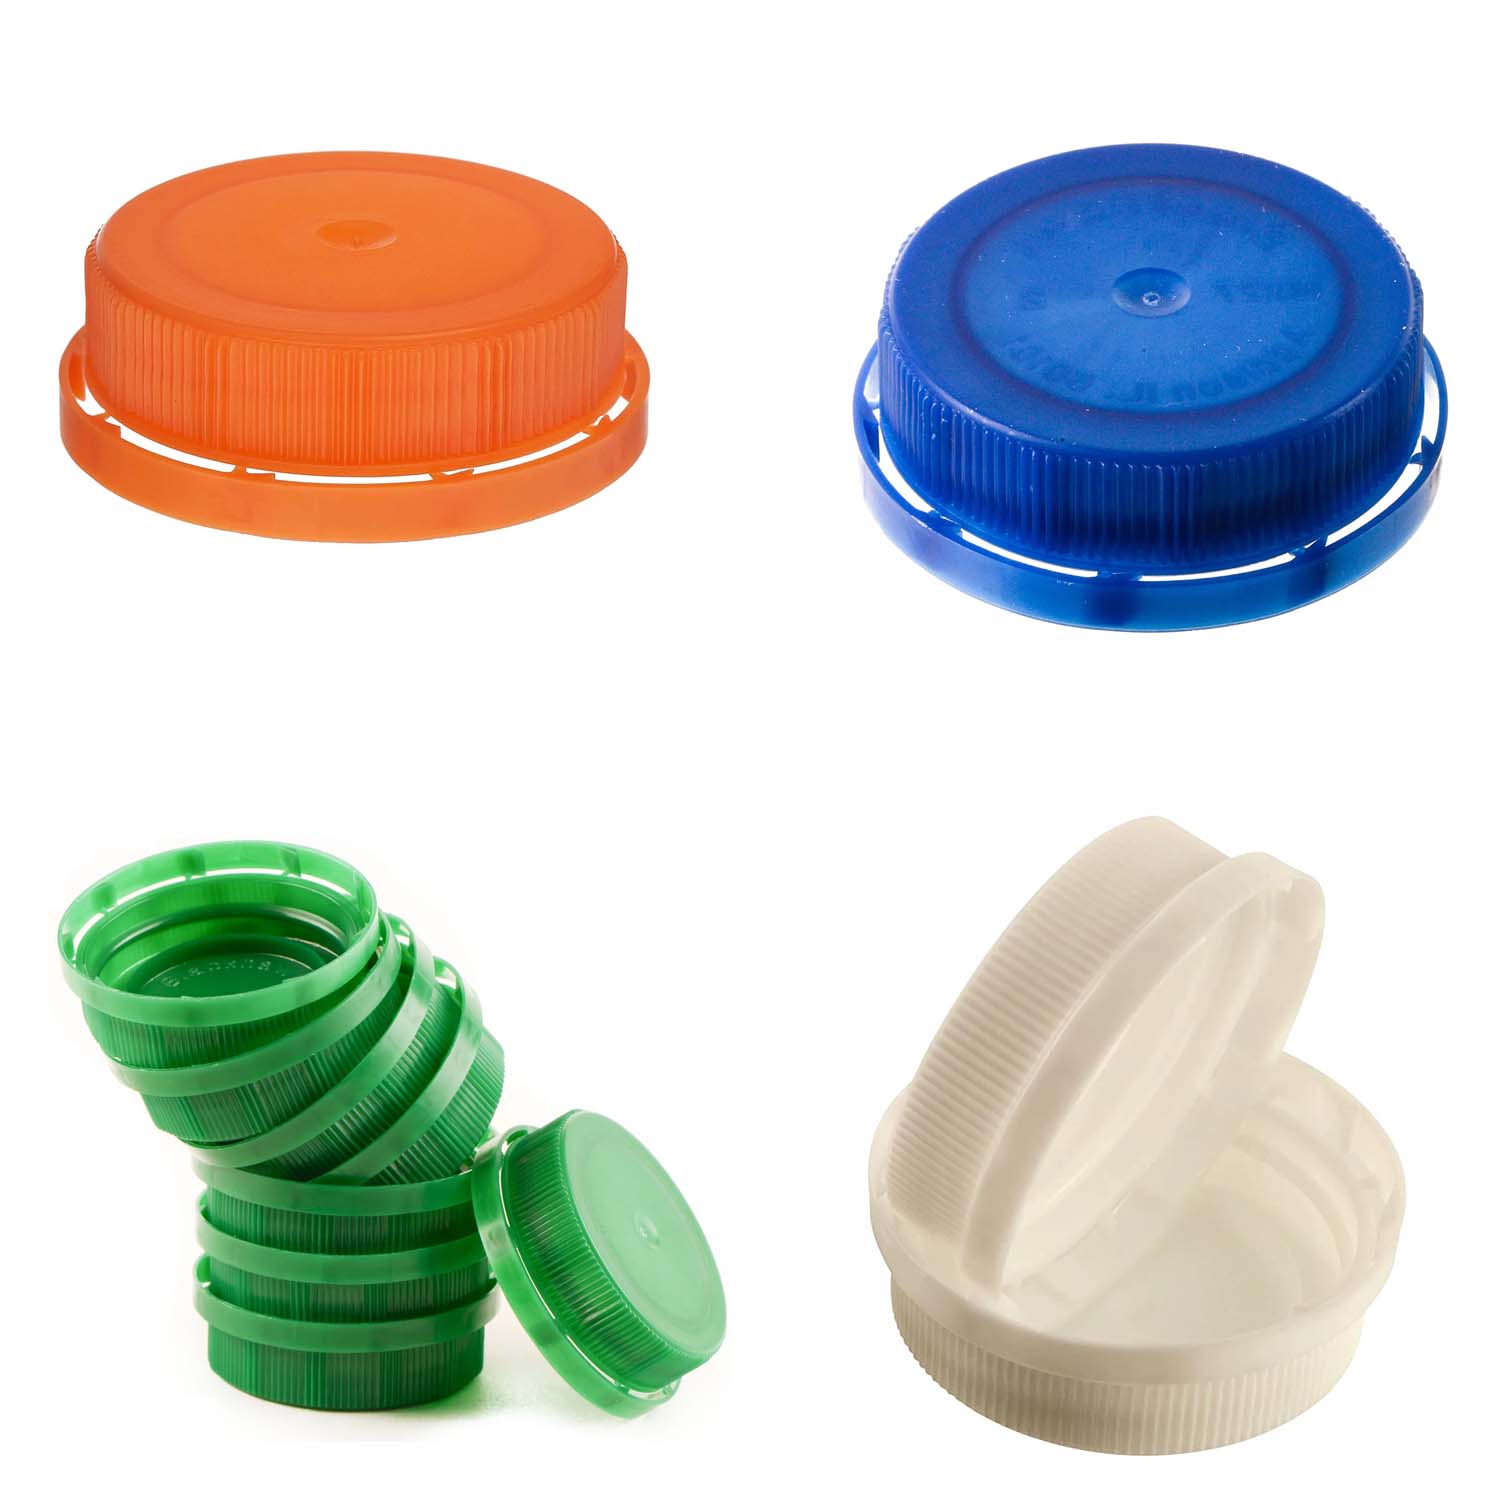 38MM Ratchet Caps and Lids for Plastic Juice Bottles For HDPE and Clear Plastic Juice Bottles, Smoothie Bottles, Fresh Squeezed Juice Container (Blue, Green, Orange)